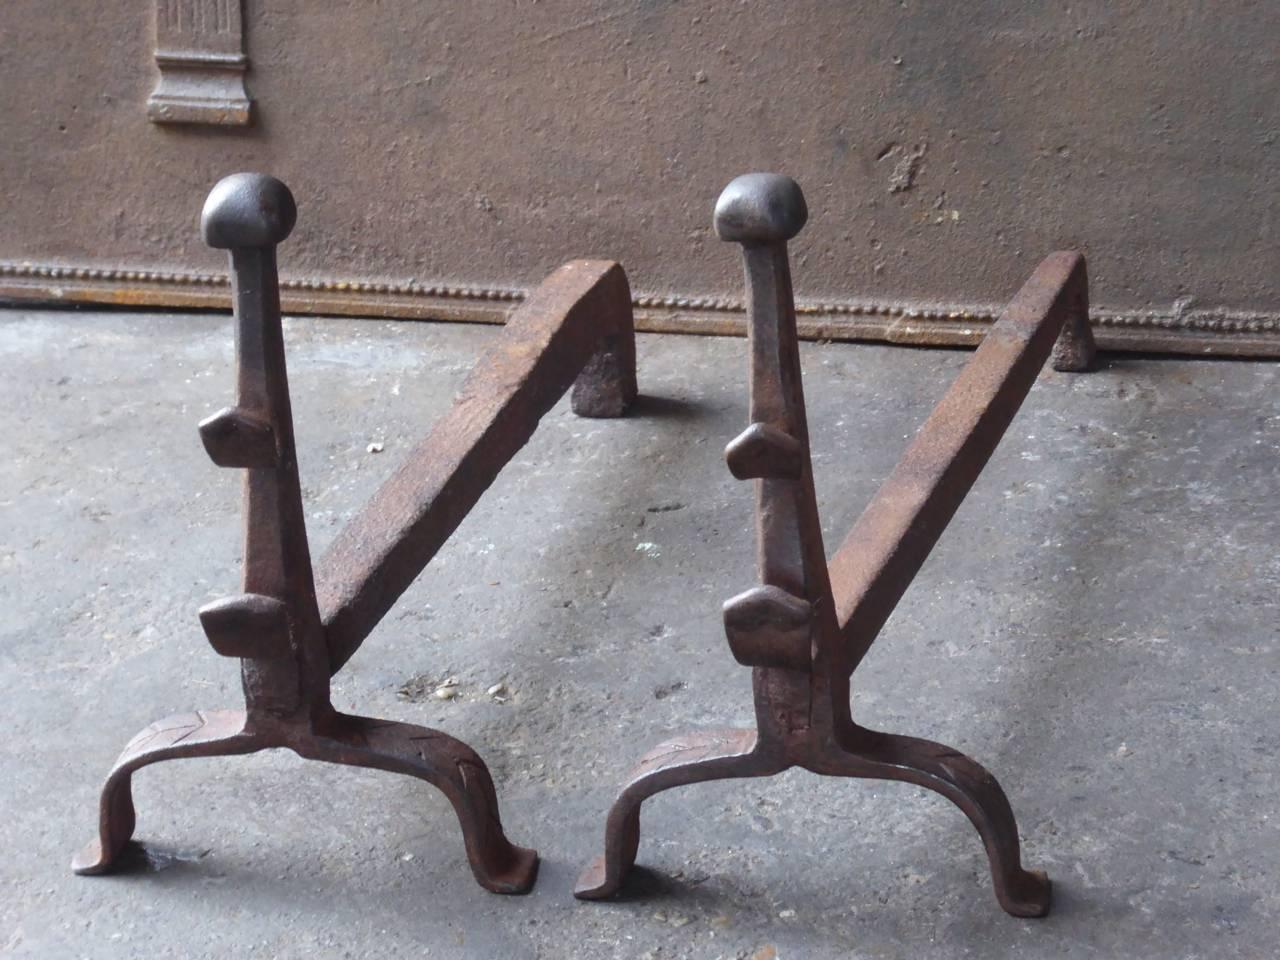 18th century French Gothic style fire dogs made of wrought iron. The firedogs have spit hooks to grill food before the fire.

We have a unique and specialized collection of antique and used fireplace accessories consisting of more than 1000 listings